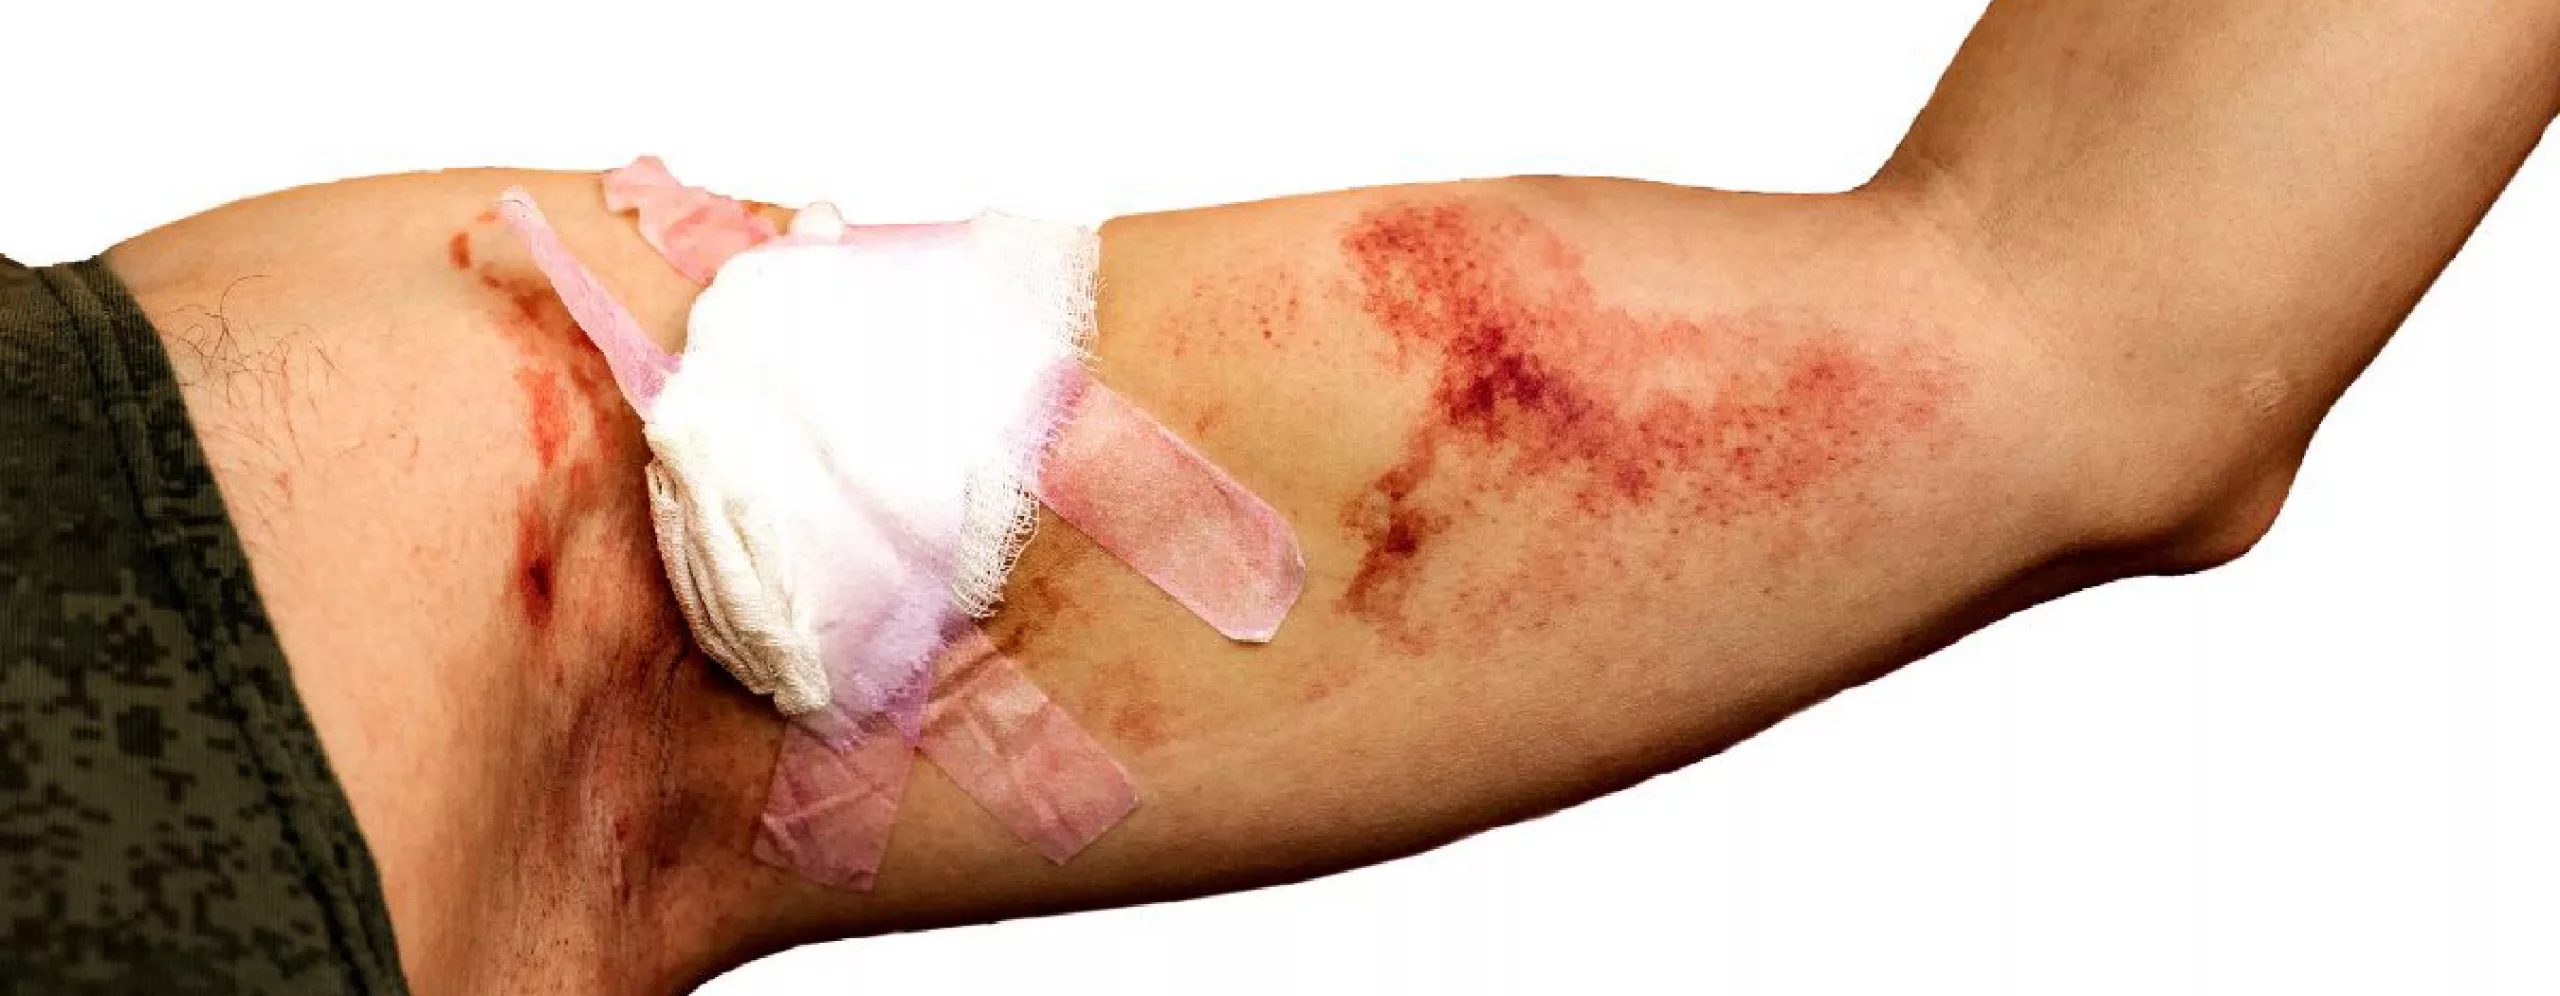 How to tell if a wound is healing or infected